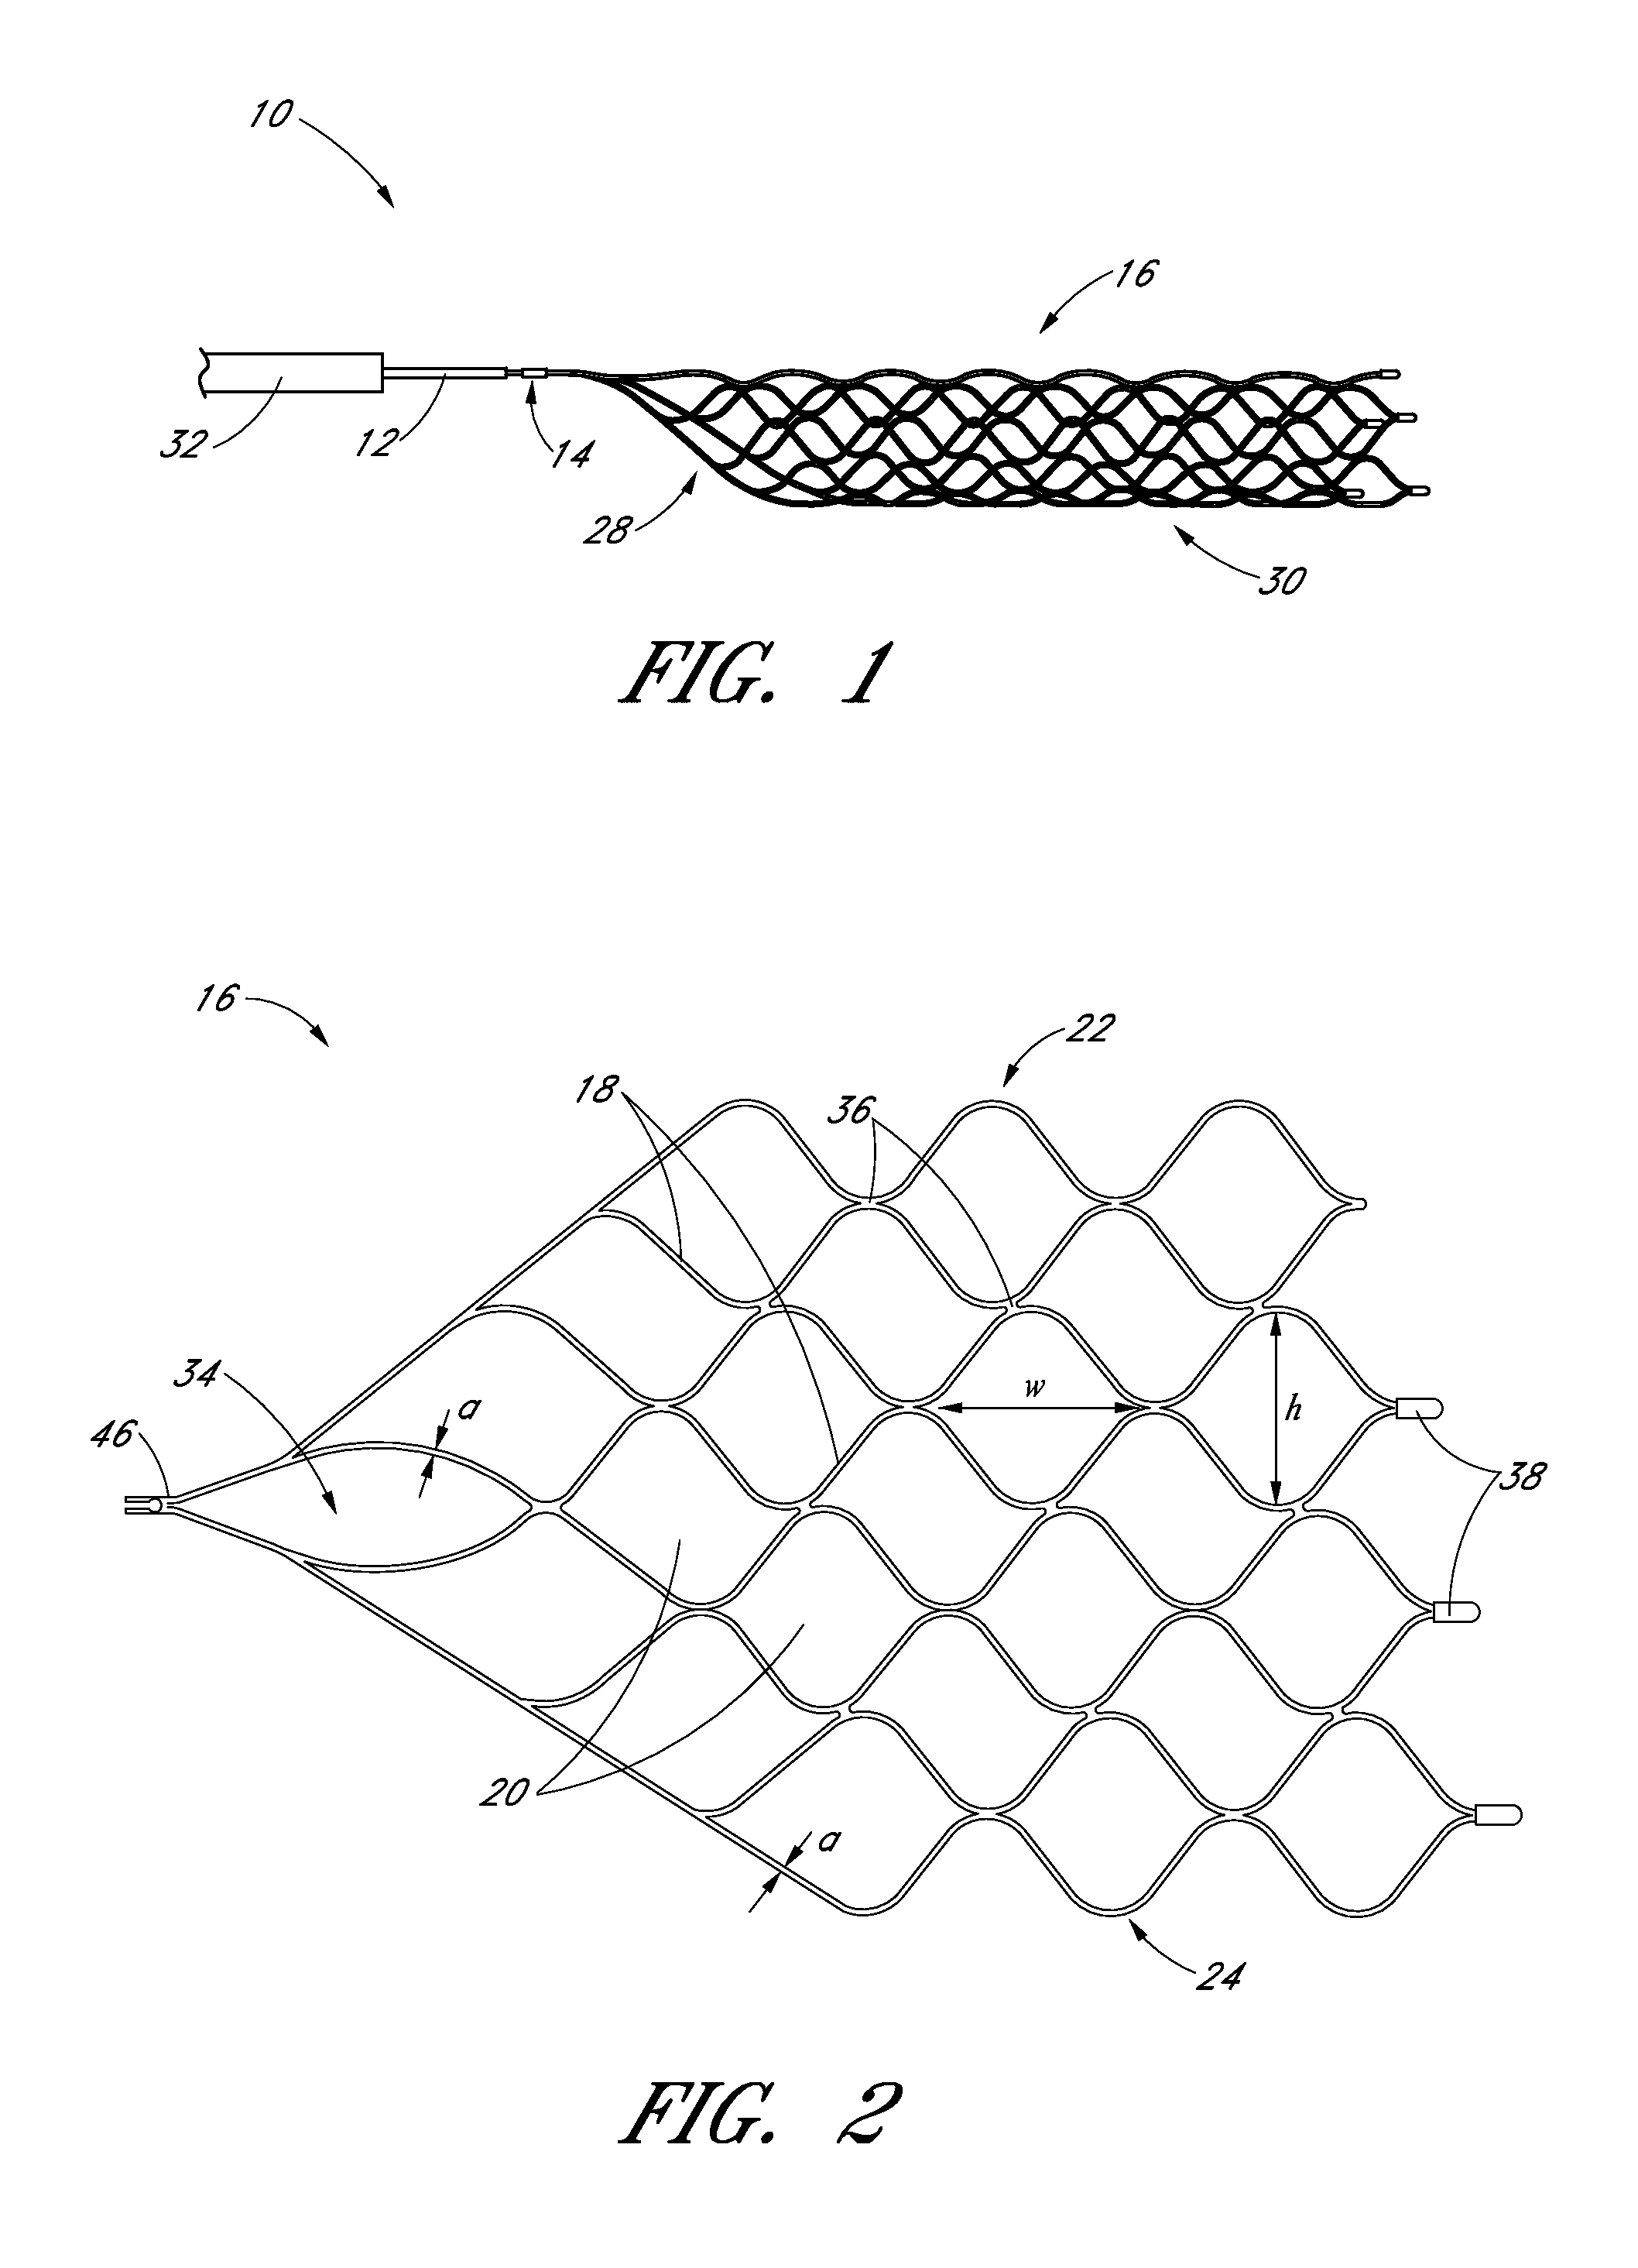 Methods and apparatuses for flow restoration and implanting members in the human body